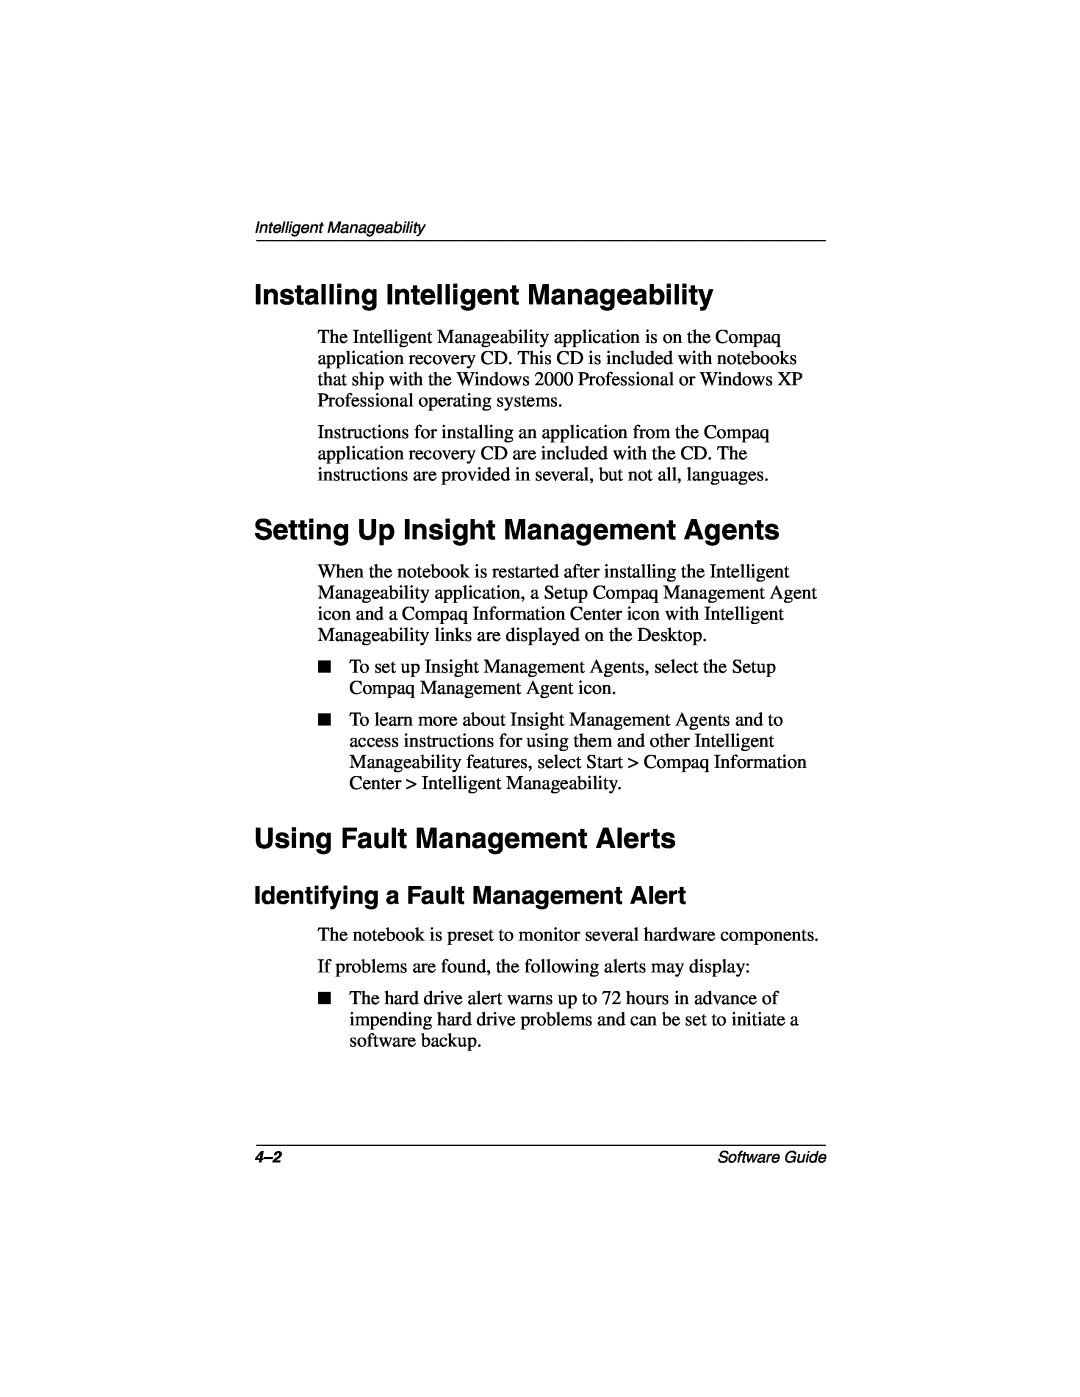 HP 2805EA manual Installing Intelligent Manageability, Setting Up Insight Management Agents, Using Fault Management Alerts 